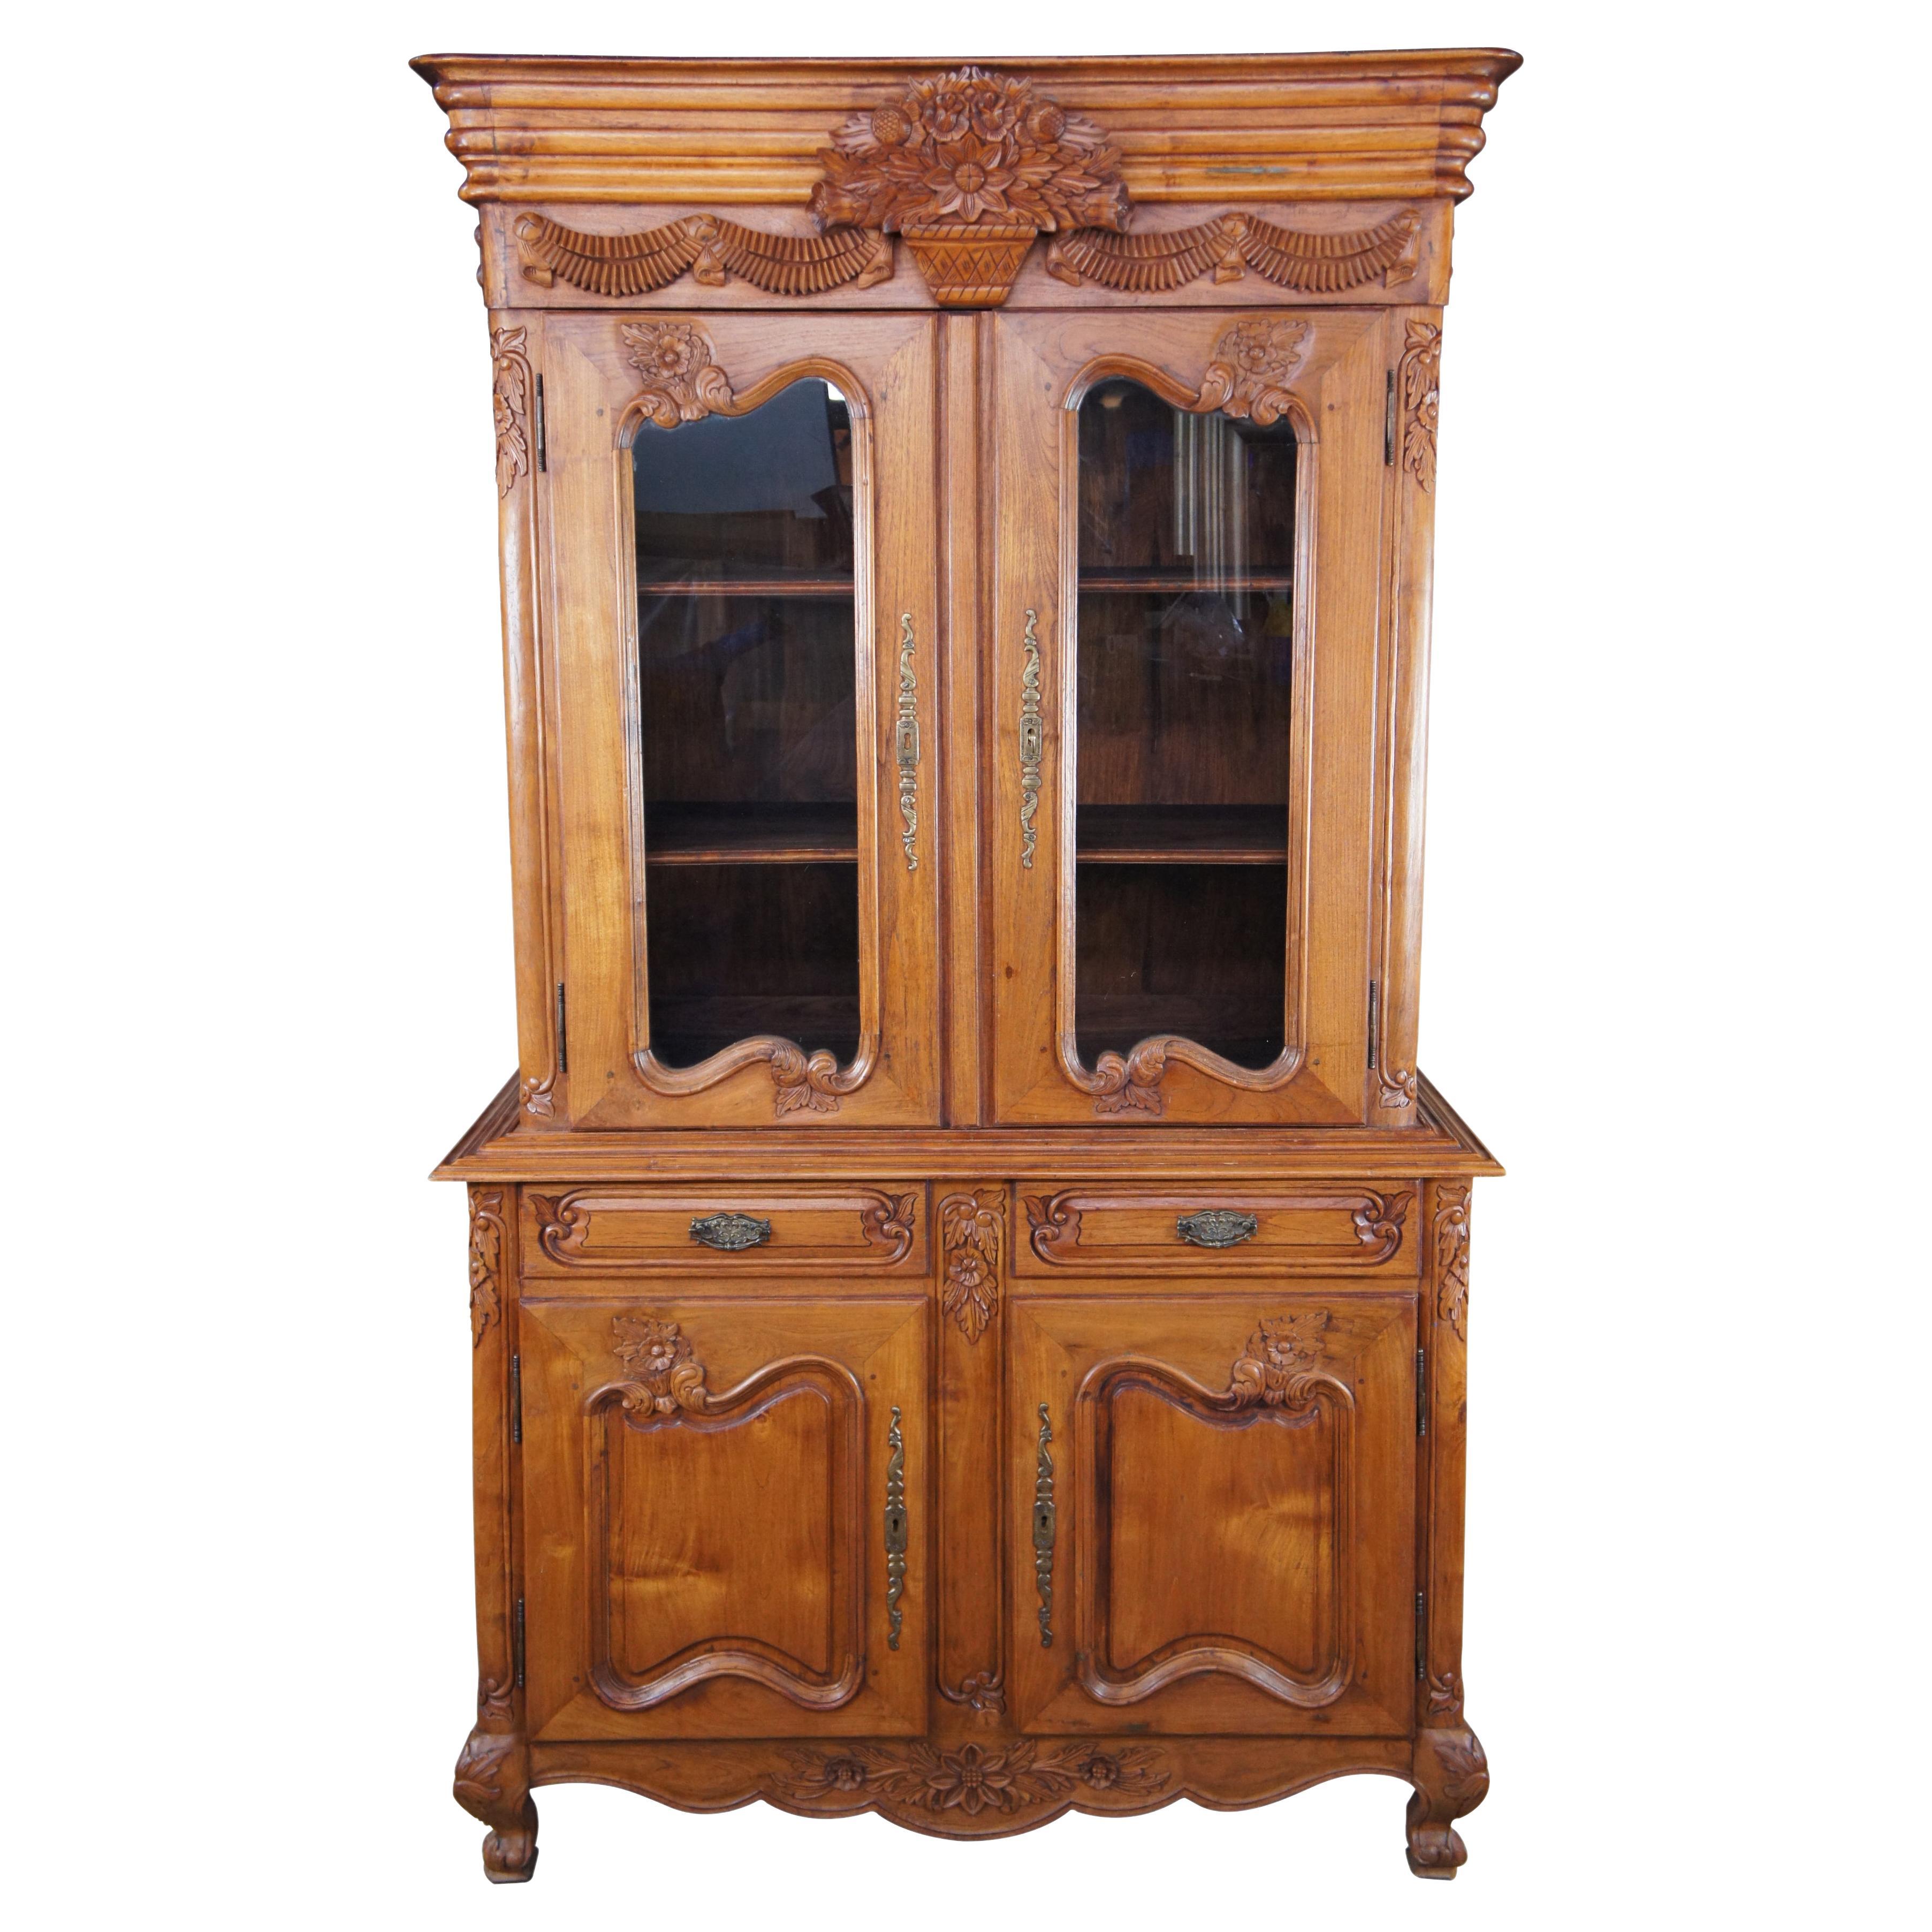 Antiqued French Revival Mahogany Buffet Deux Corps Hutch China Curio Cabinet 88"